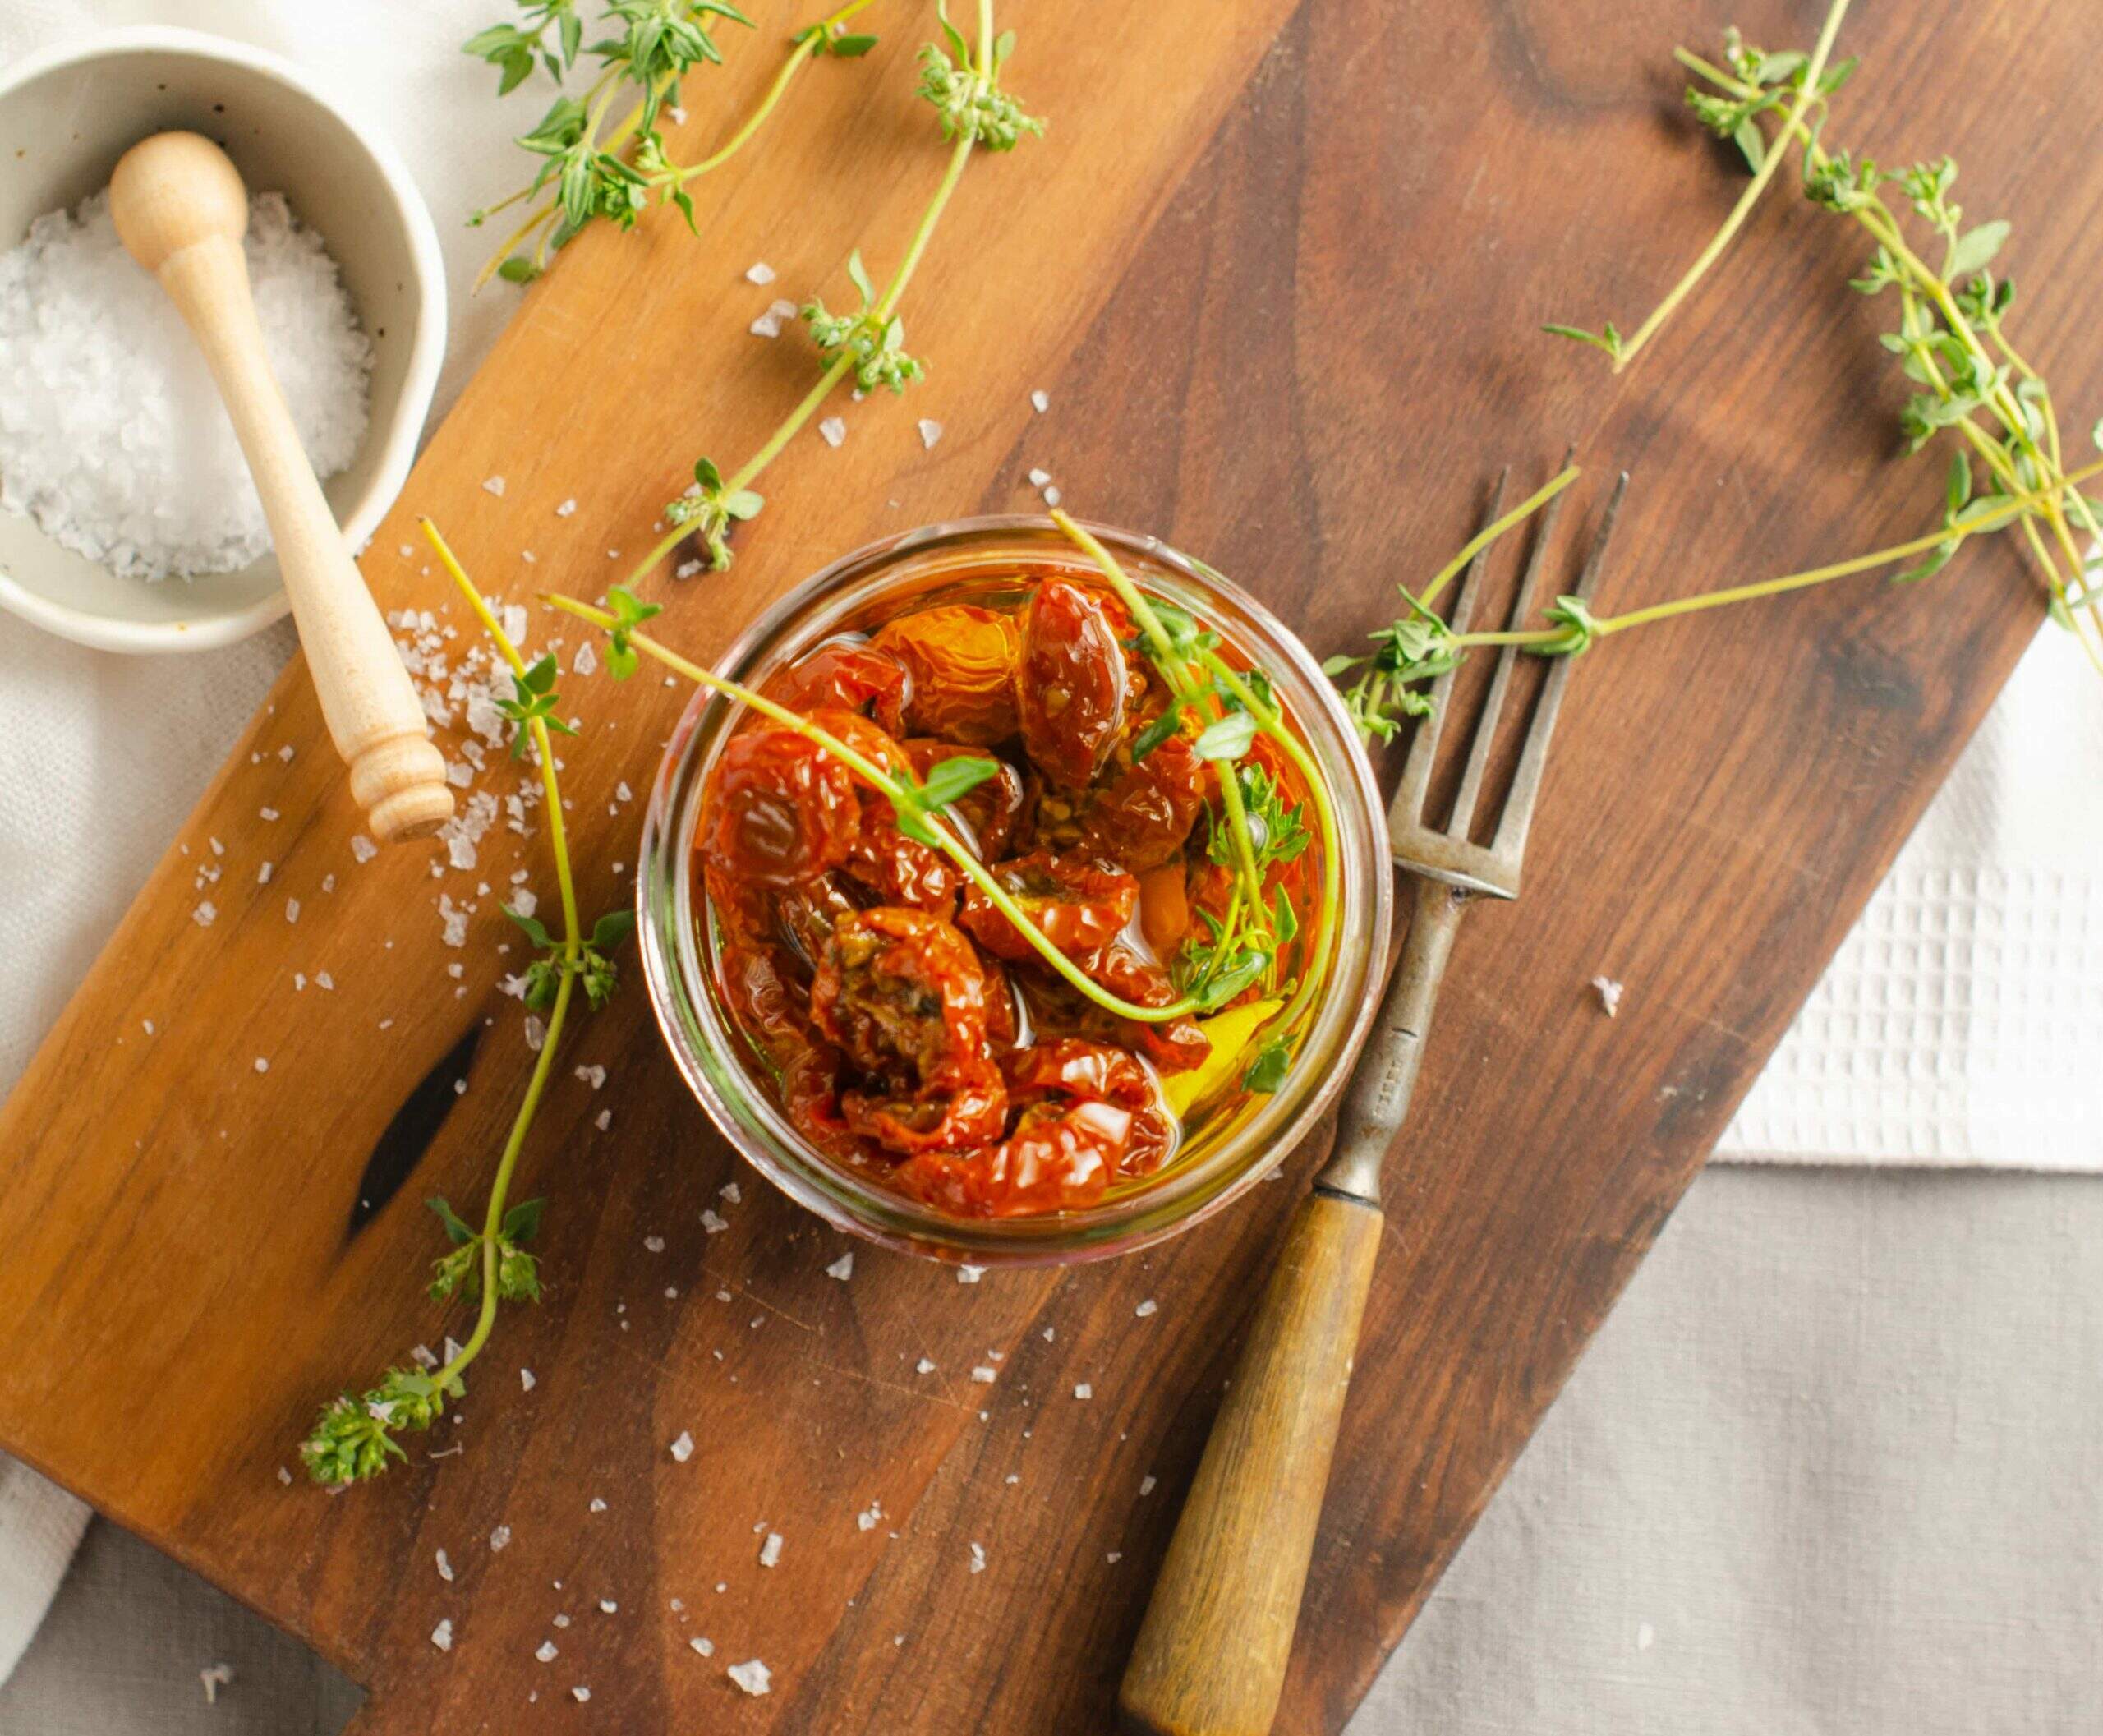 A jar filled with oven roasted tomatoes in oil with thyme and sitting on a dark wooden board, sea salt sprinkled and in a pinch bowl and a wooden handled fork for serving.